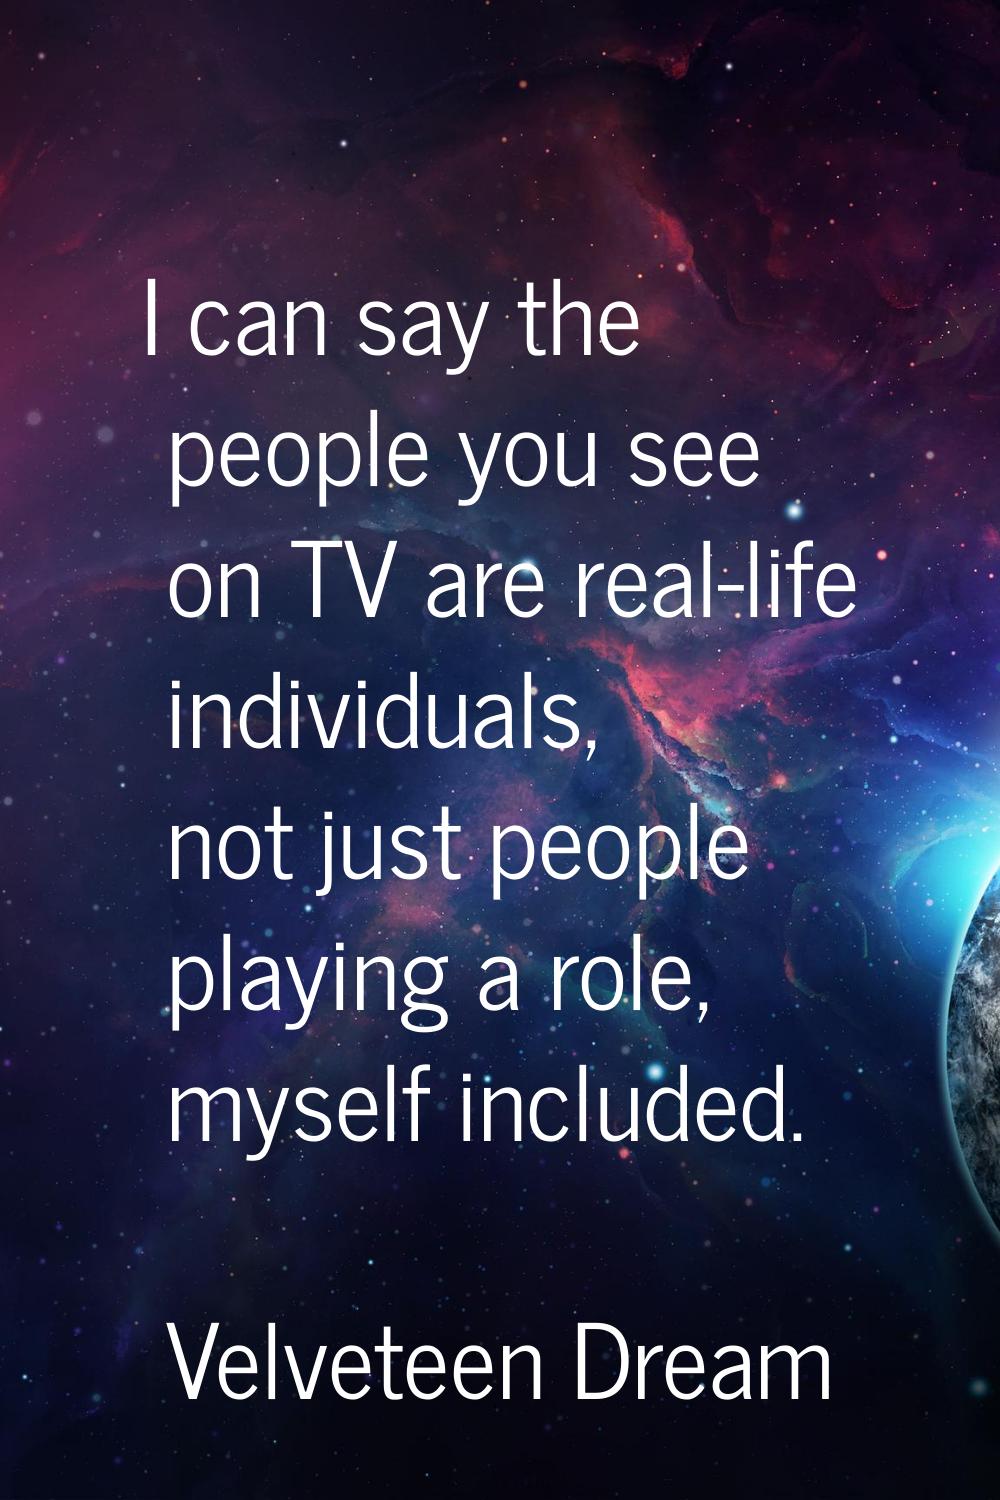 I can say the people you see on TV are real-life individuals, not just people playing a role, mysel